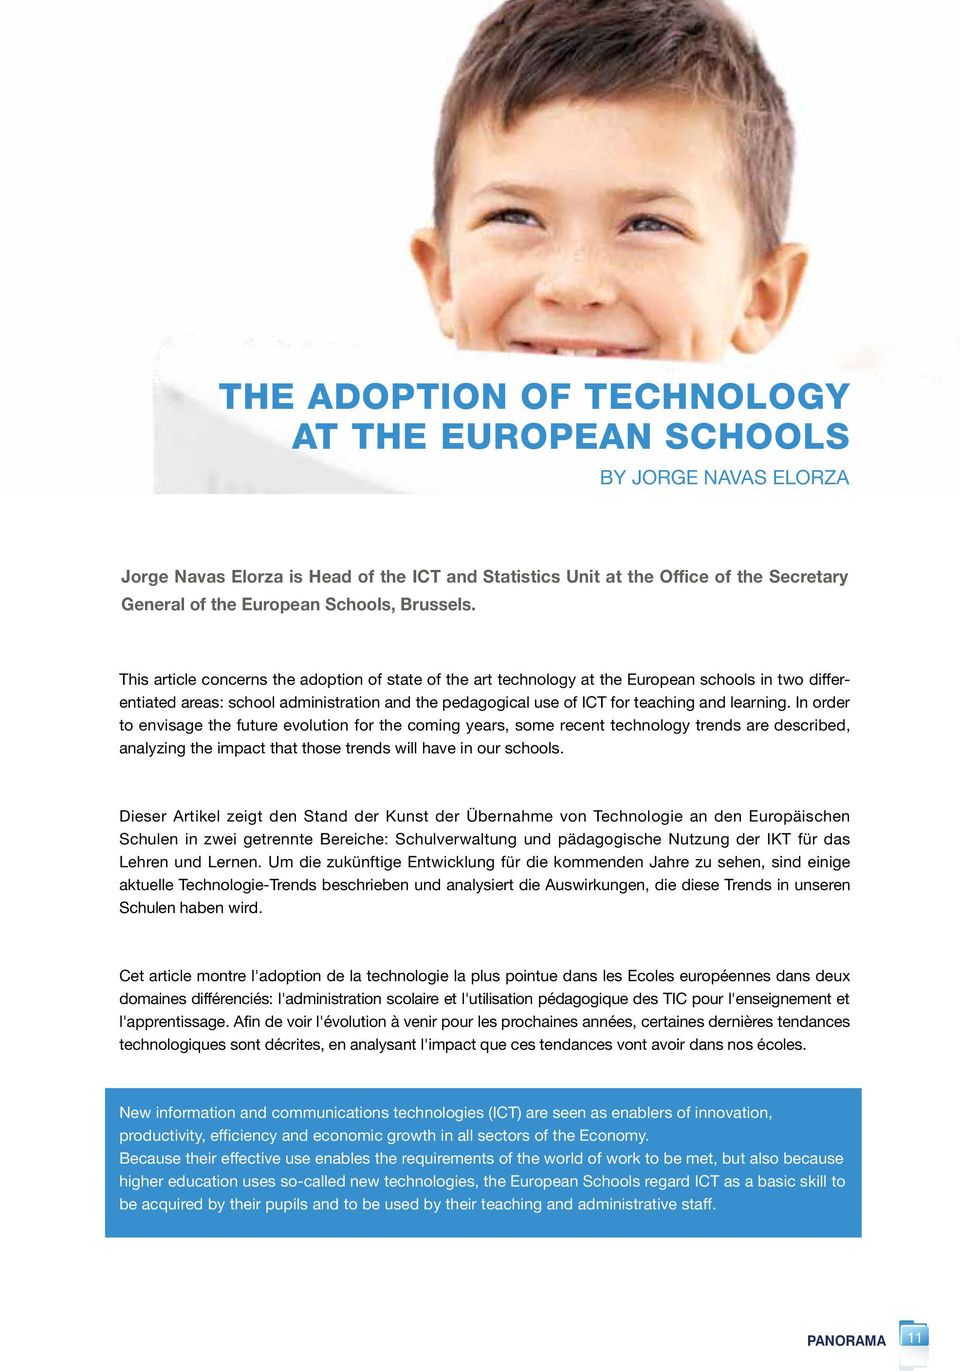 This article concerns the adoption of state of the art technology at the European schools in two differentiated areas: school administration and the pedagogical use of ICT for teaching and learning.